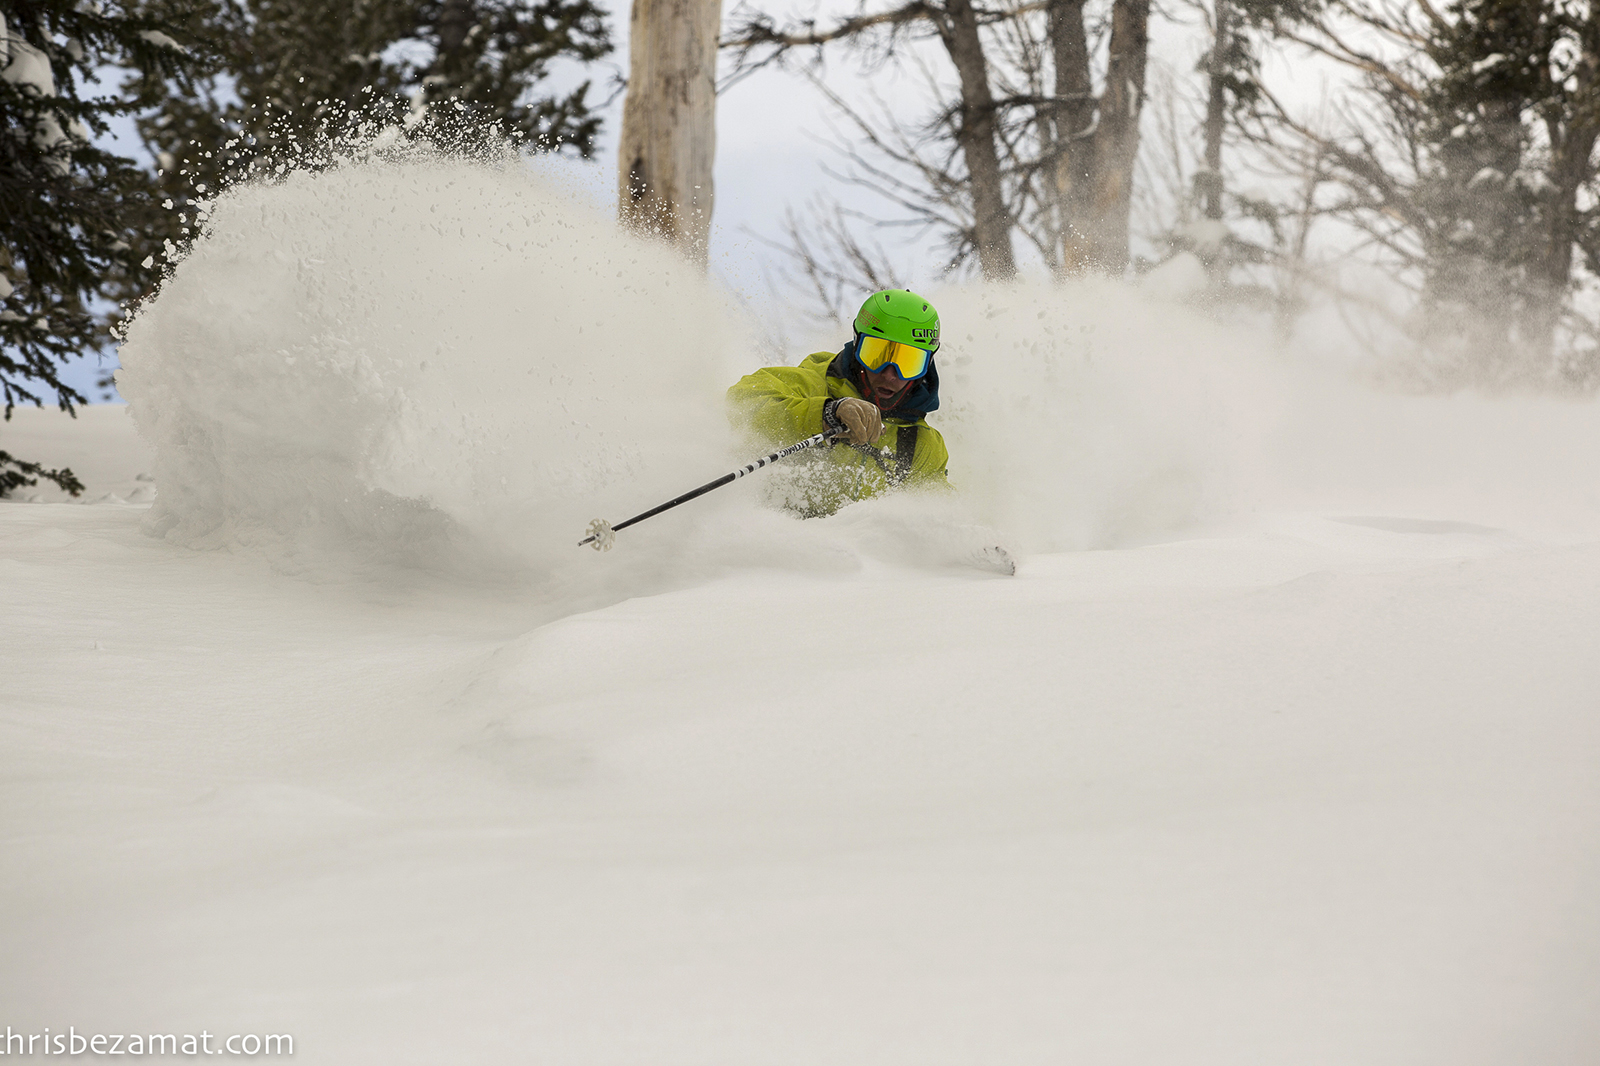 Bryce Newcomb finding the goods. PC: Chris Bezmat